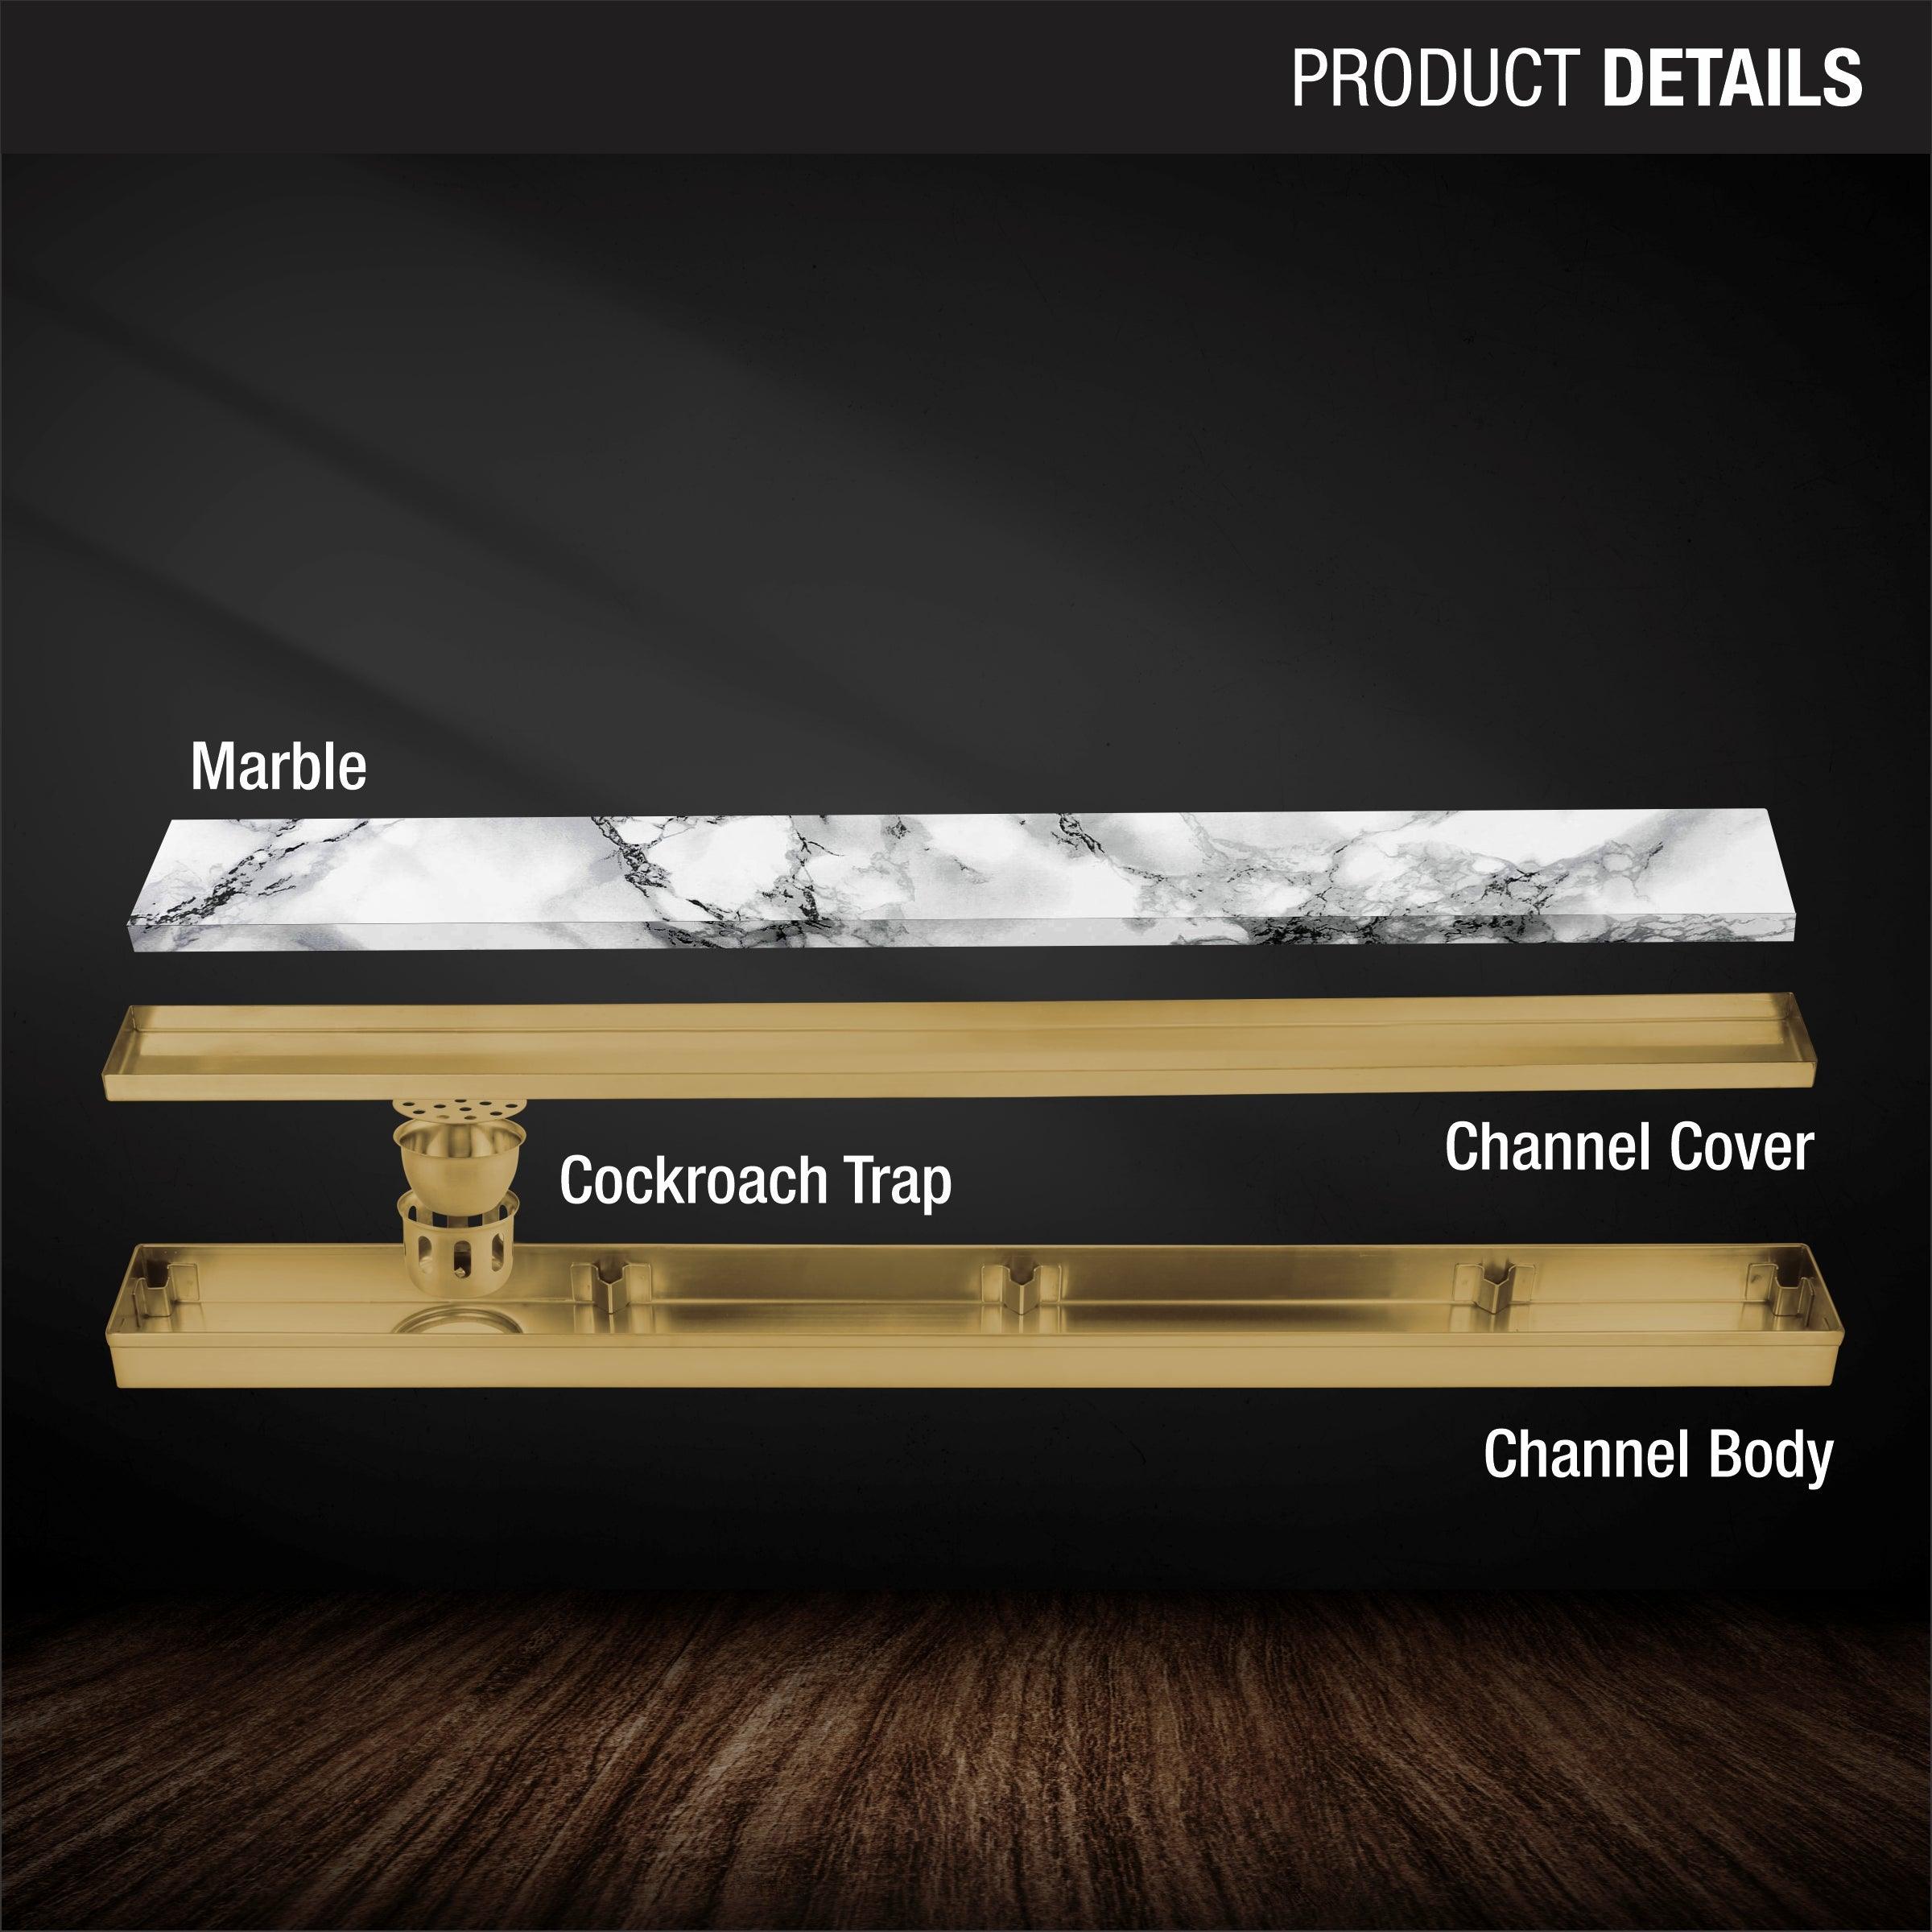 Marble Insert Shower Drain Channel - Yellow Gold (36 x 3 Inches) product details